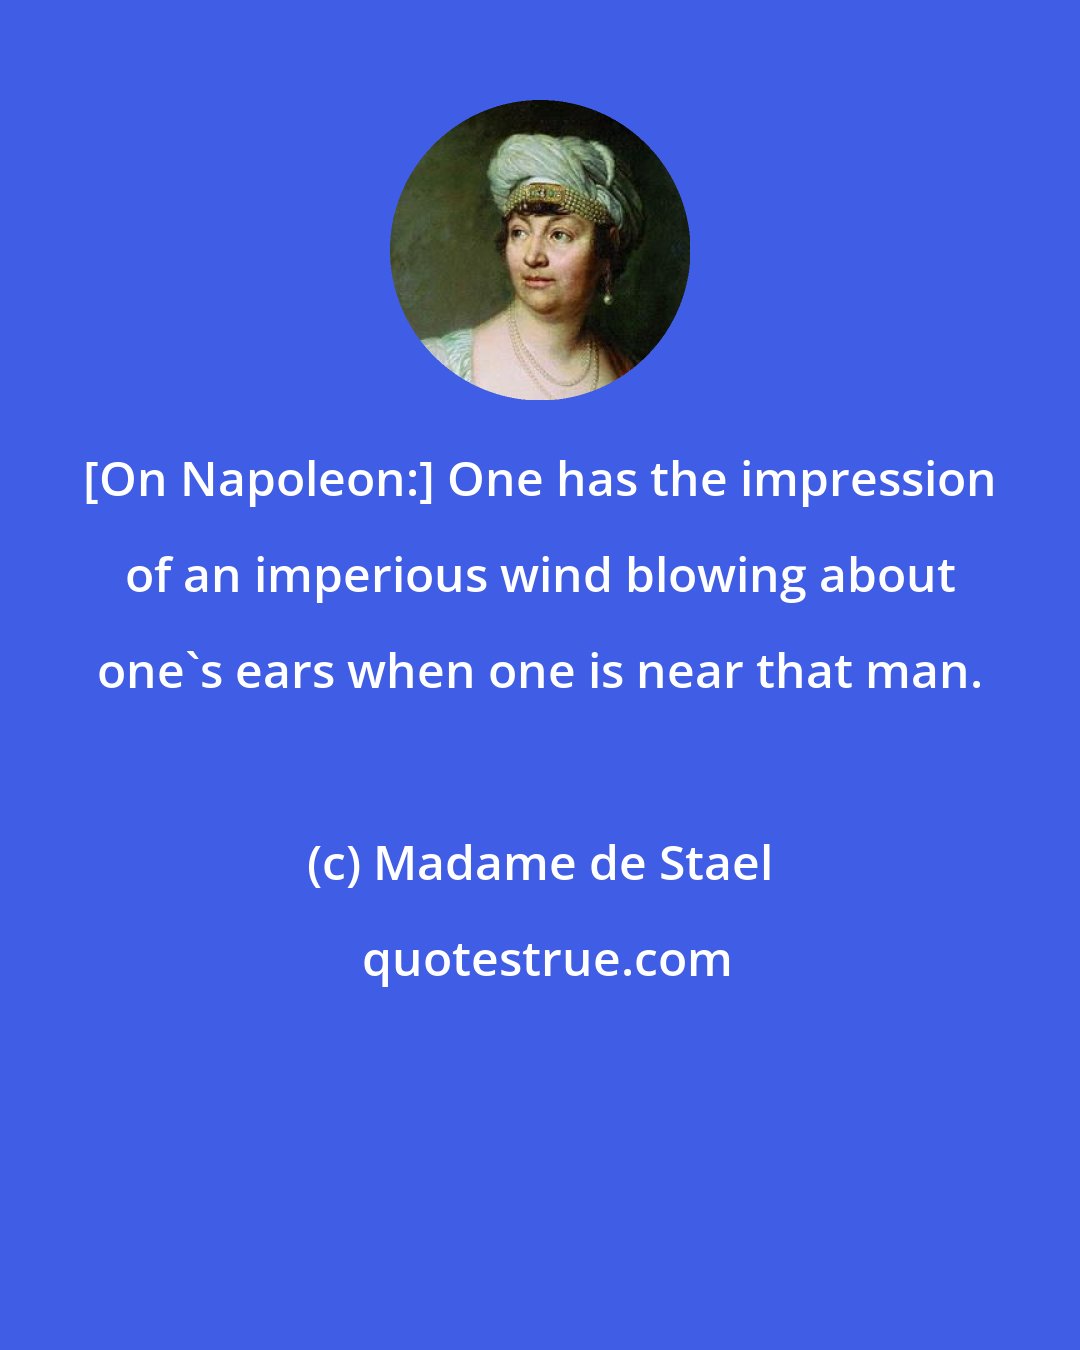 Madame de Stael: [On Napoleon:] One has the impression of an imperious wind blowing about one's ears when one is near that man.